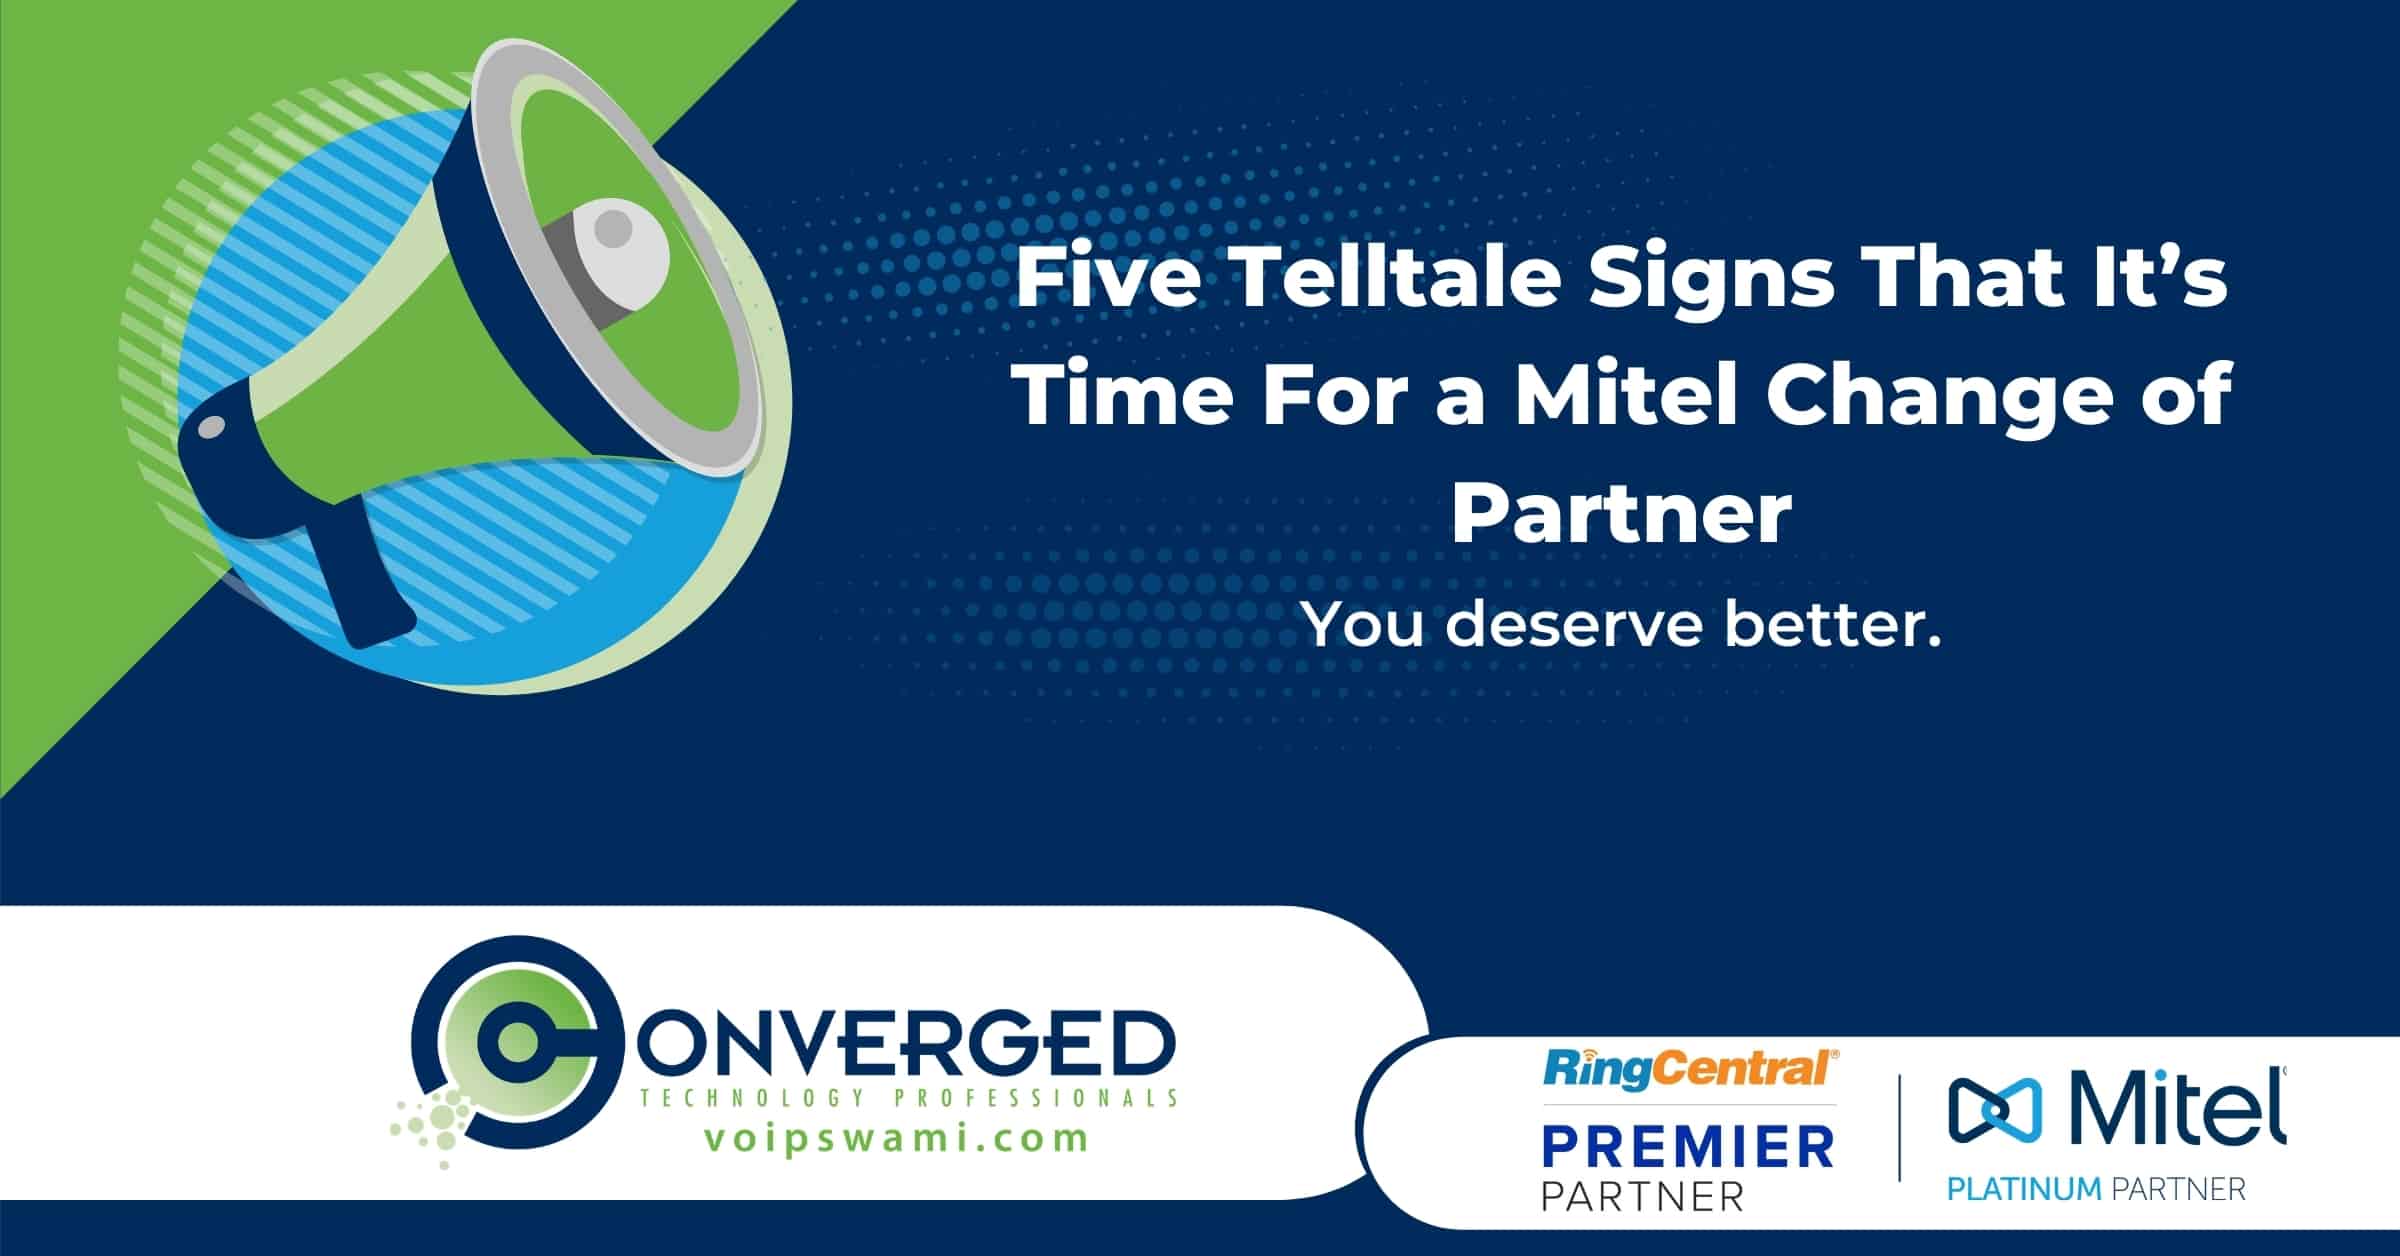 Five Telltale Signs That It’s Time For a Mitel Change of Partner